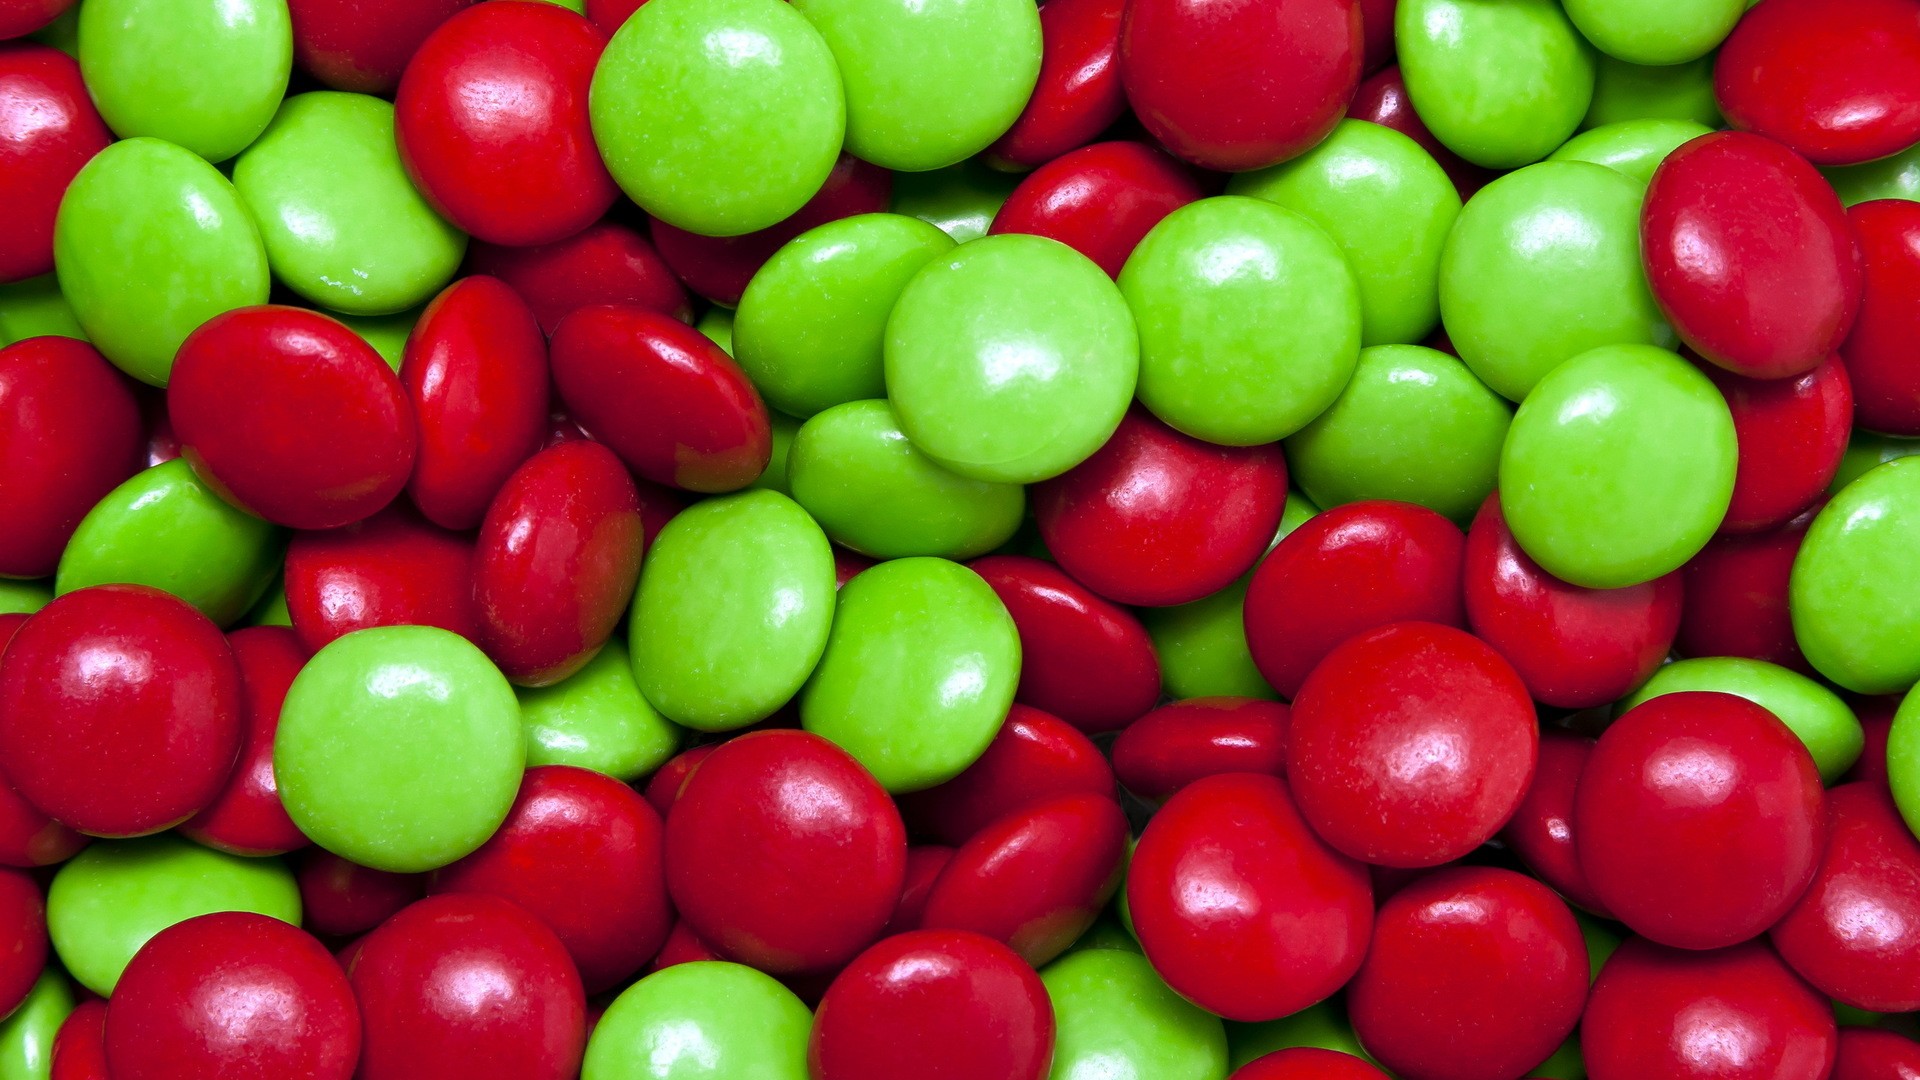 General 1920x1080 candy sweets red green pattern reflection food